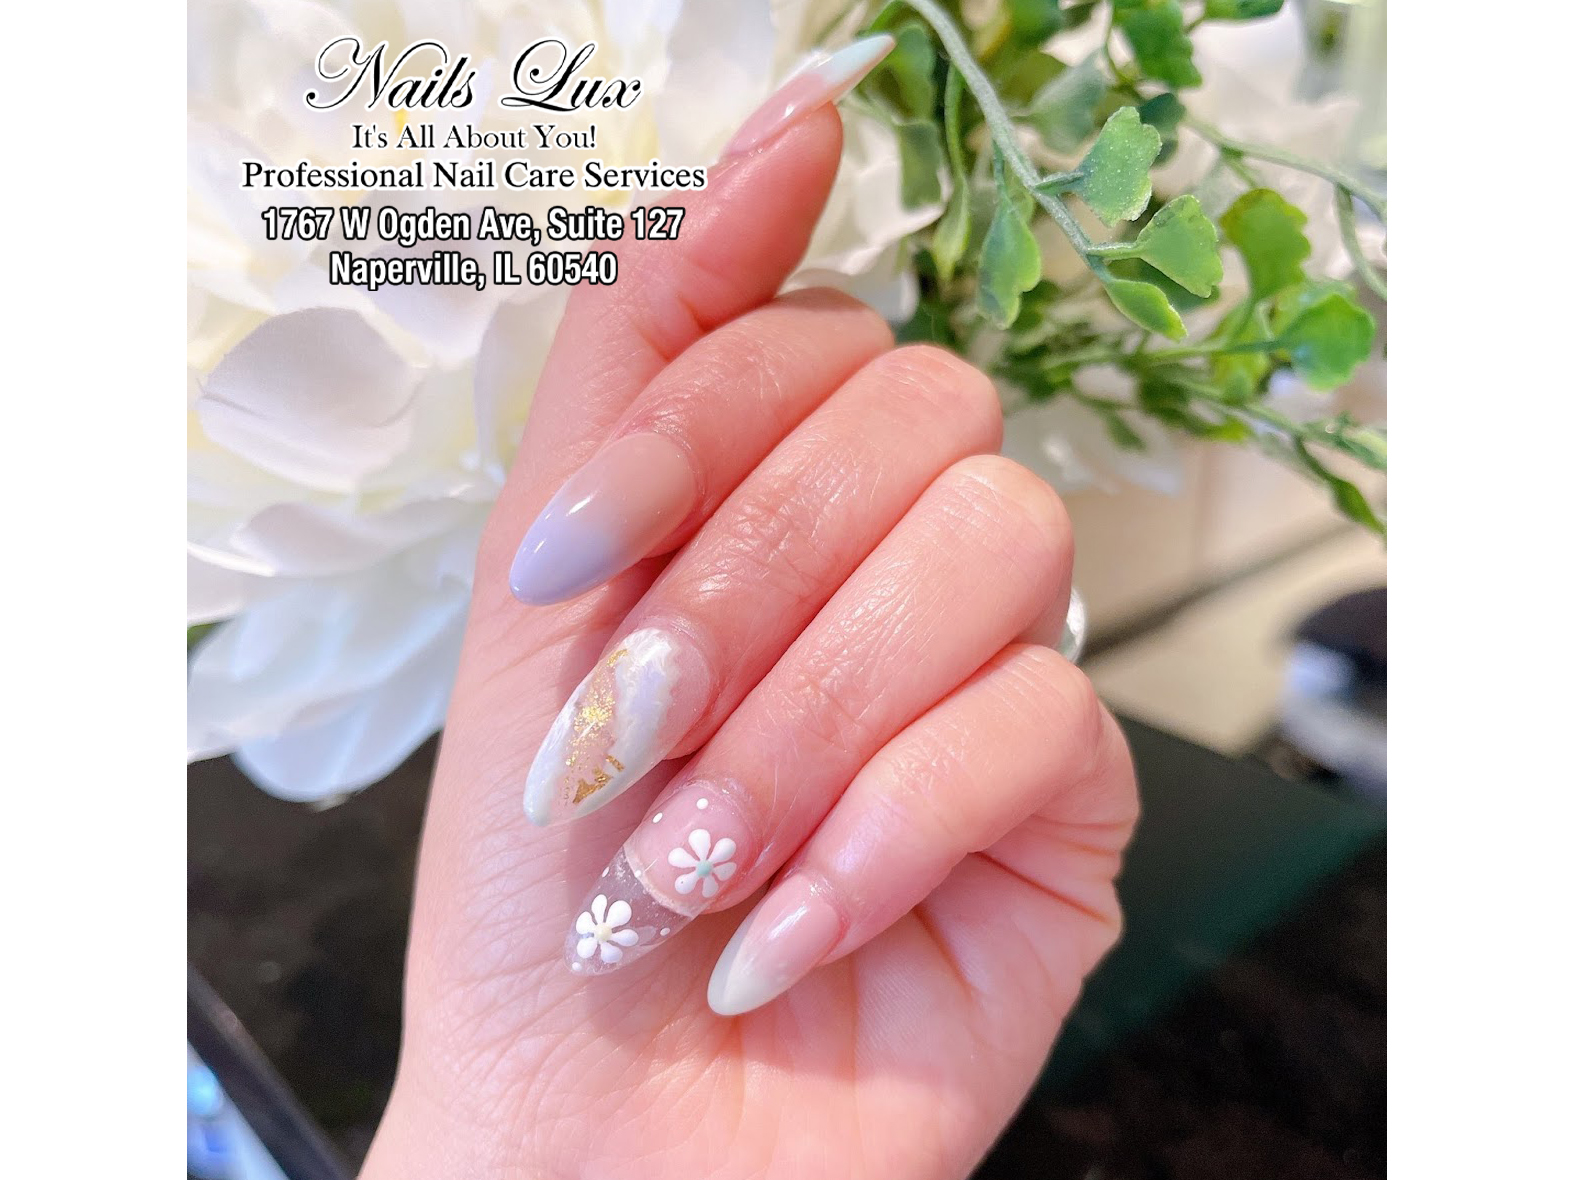 Nails are the finishing touch to any great style. Call us today